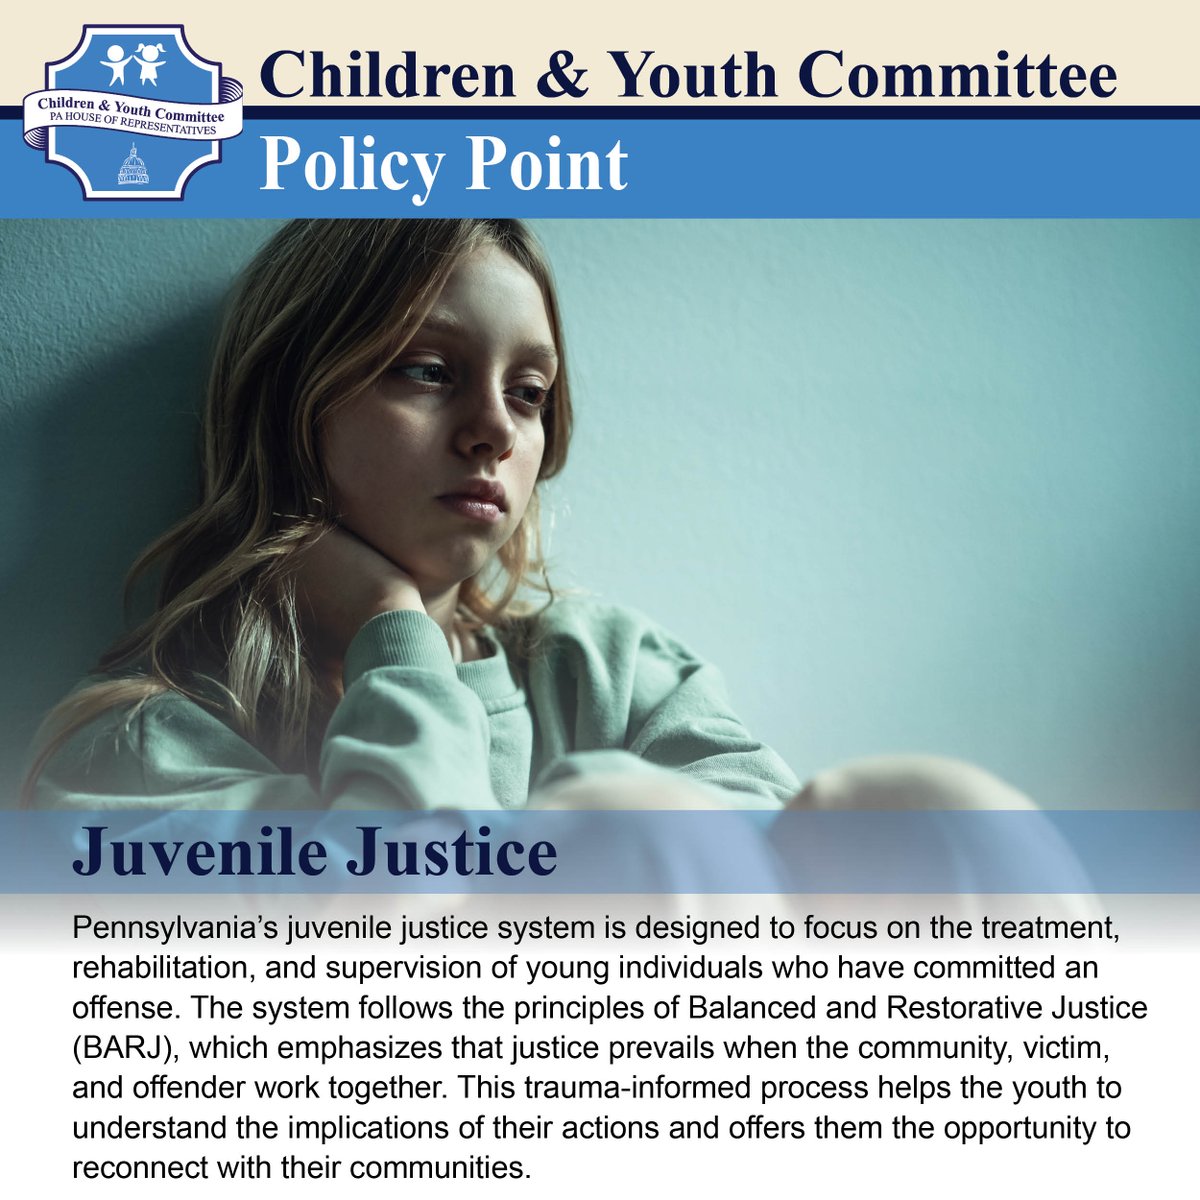 In the House Children & Youth Committee, we are working on legislation that will make the Juvenile Justice system function better and focus on the trauma-informed treatment, rehabilitation and reintegration into the community of youth in the system.